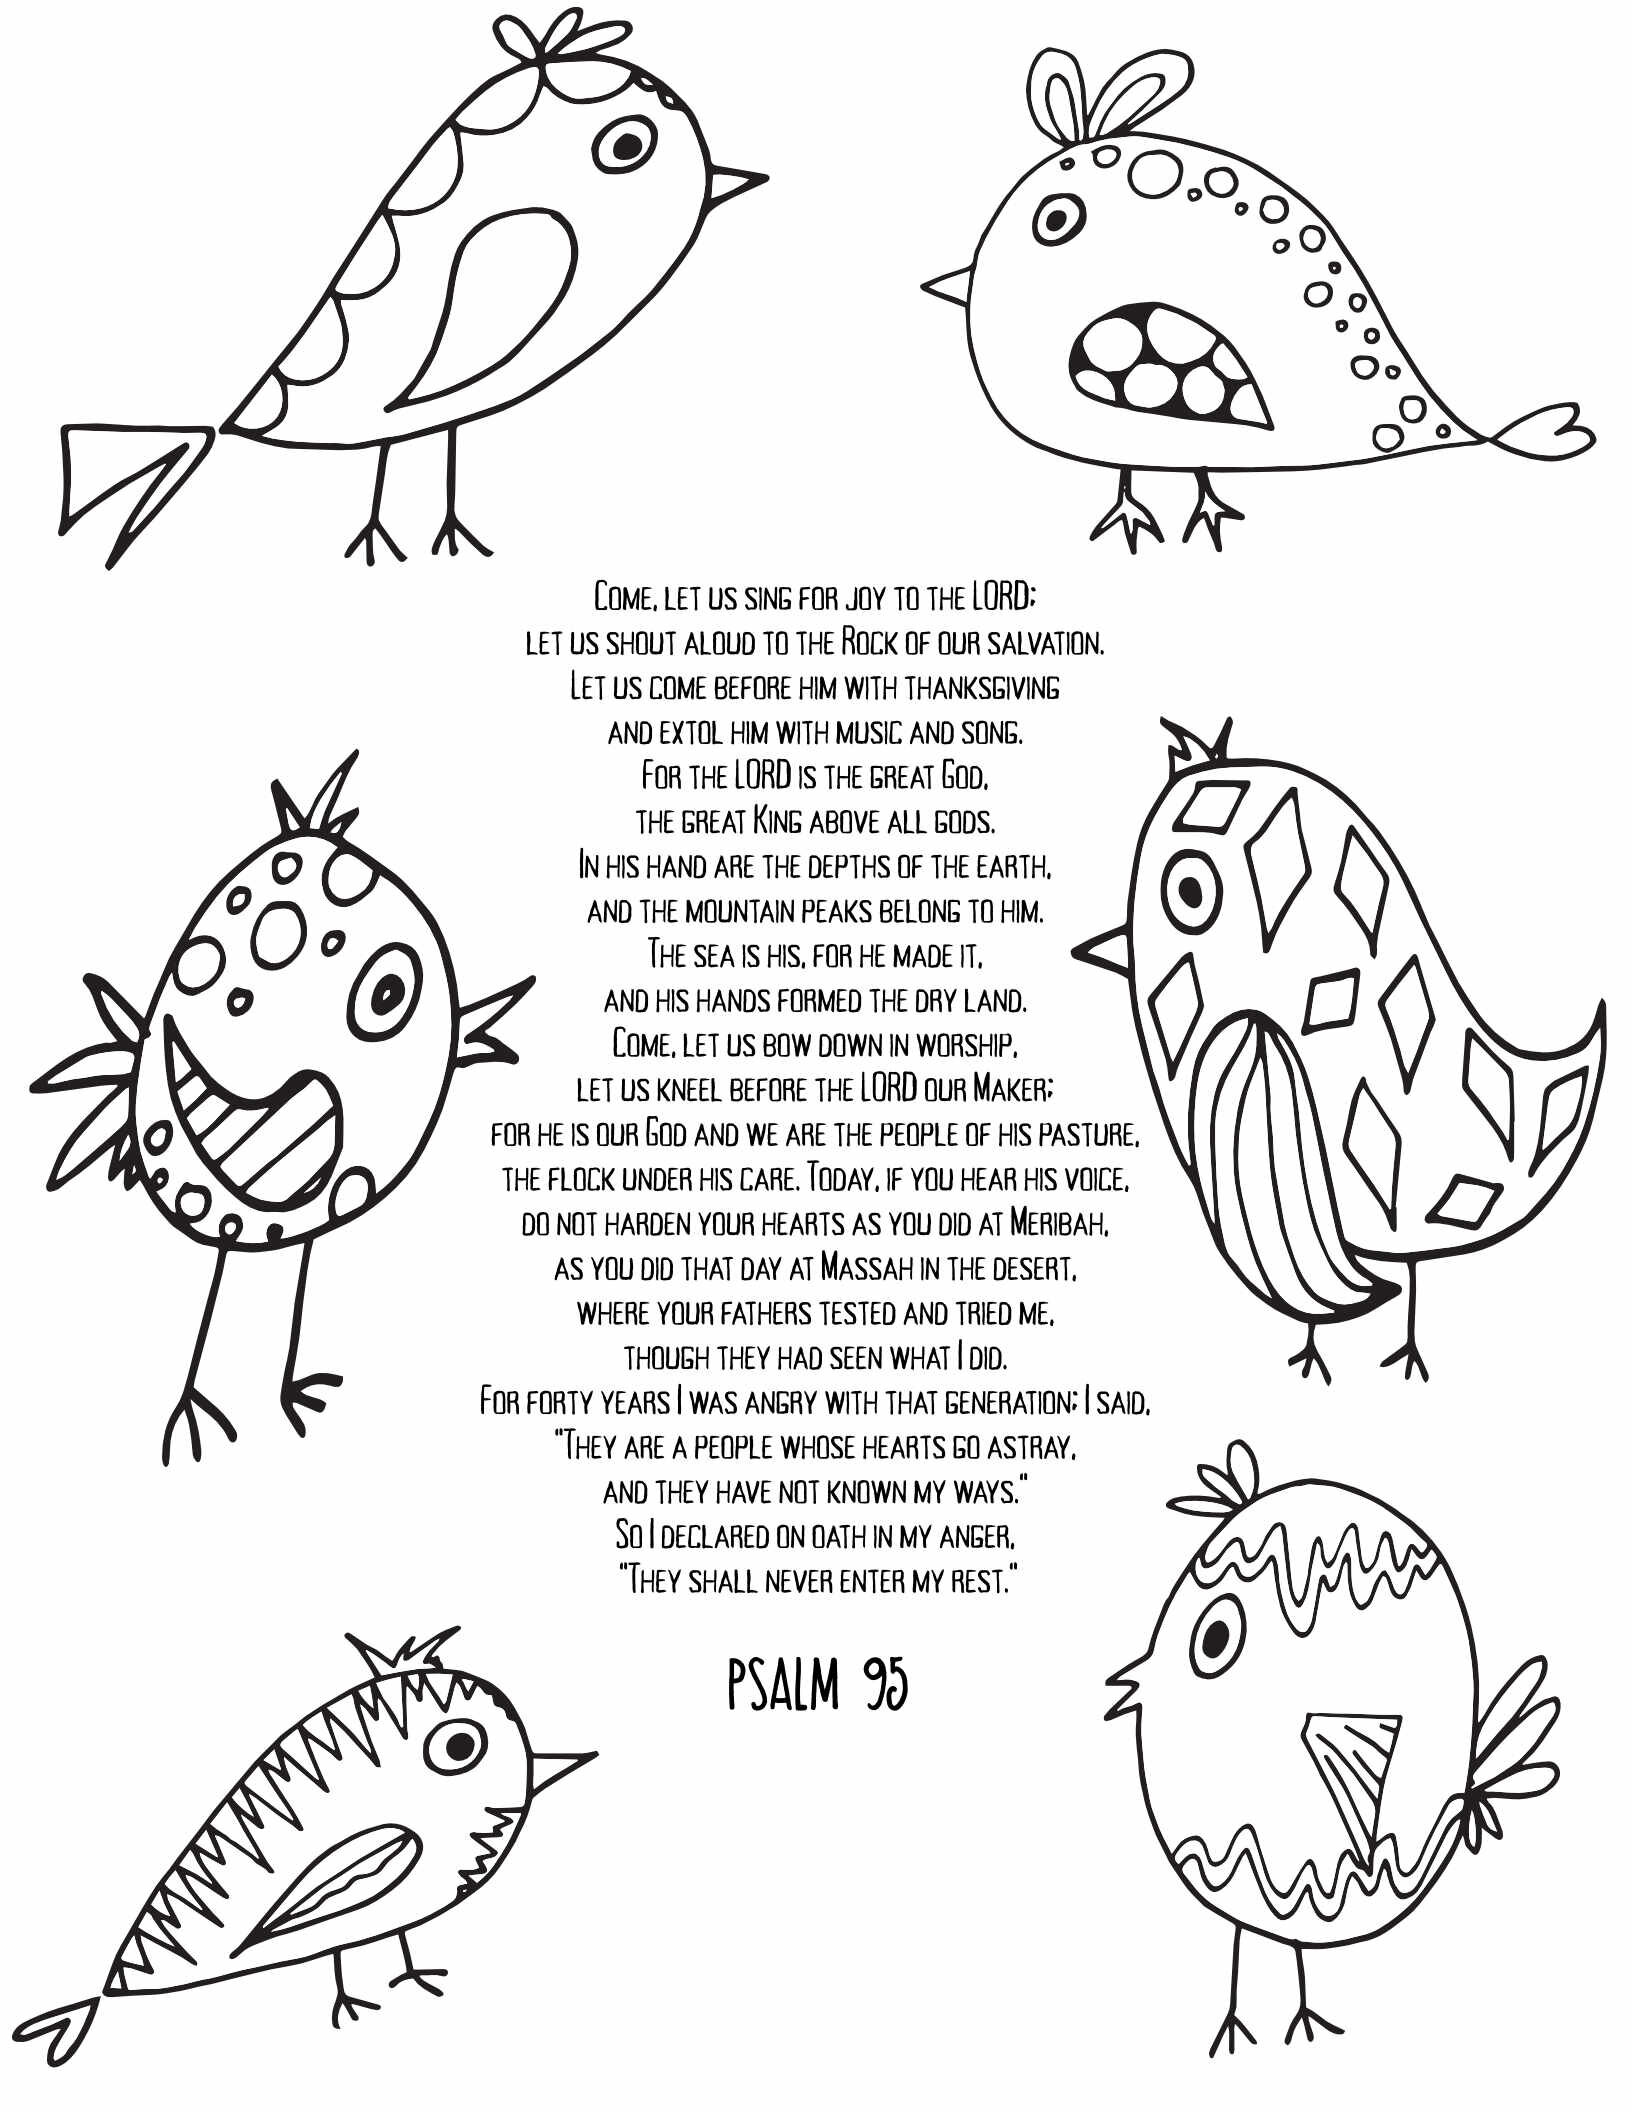 10 Free Printable Psalm Coloring Pages - Download and Color Adult Scripture - Psalm 95CLICK HERE TO DOWNLOAD THIS PAGE FREE